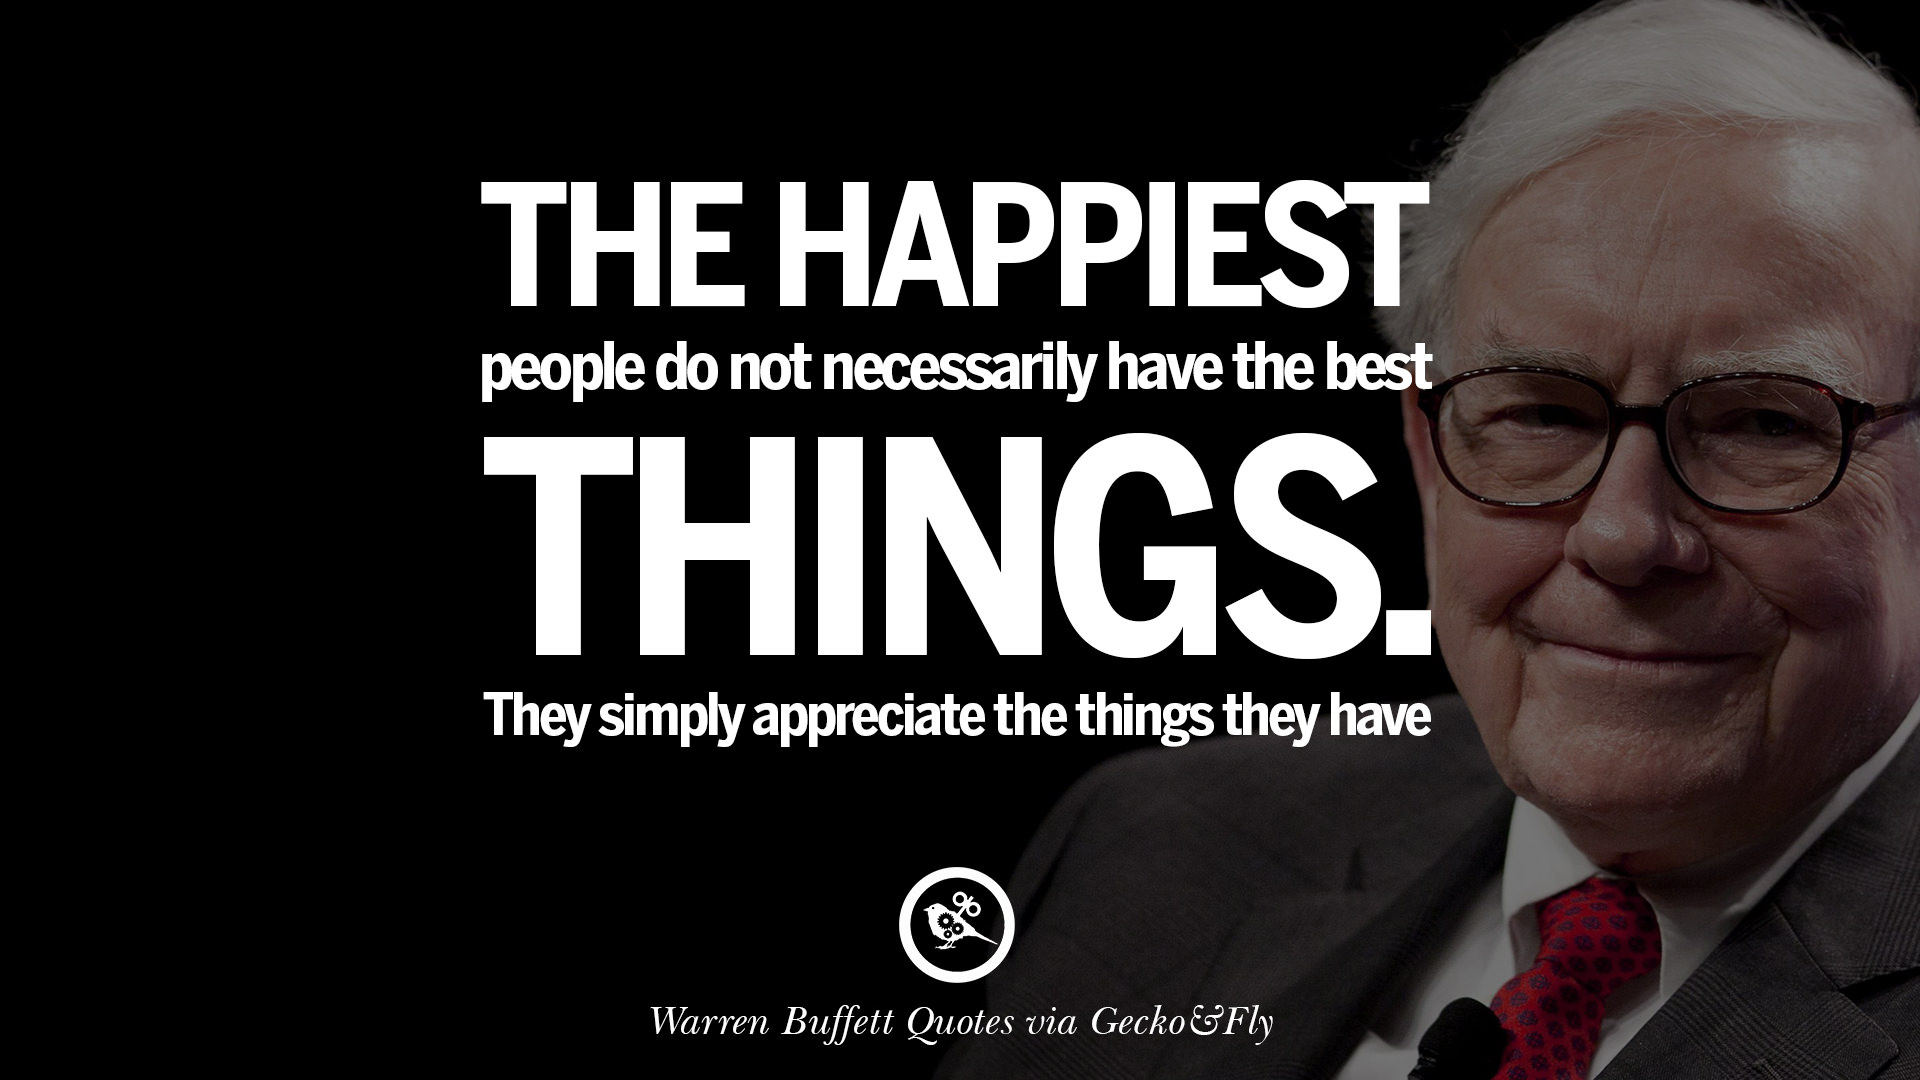 12 Best Warren Buffett Quotes on Investment Life and Making Money